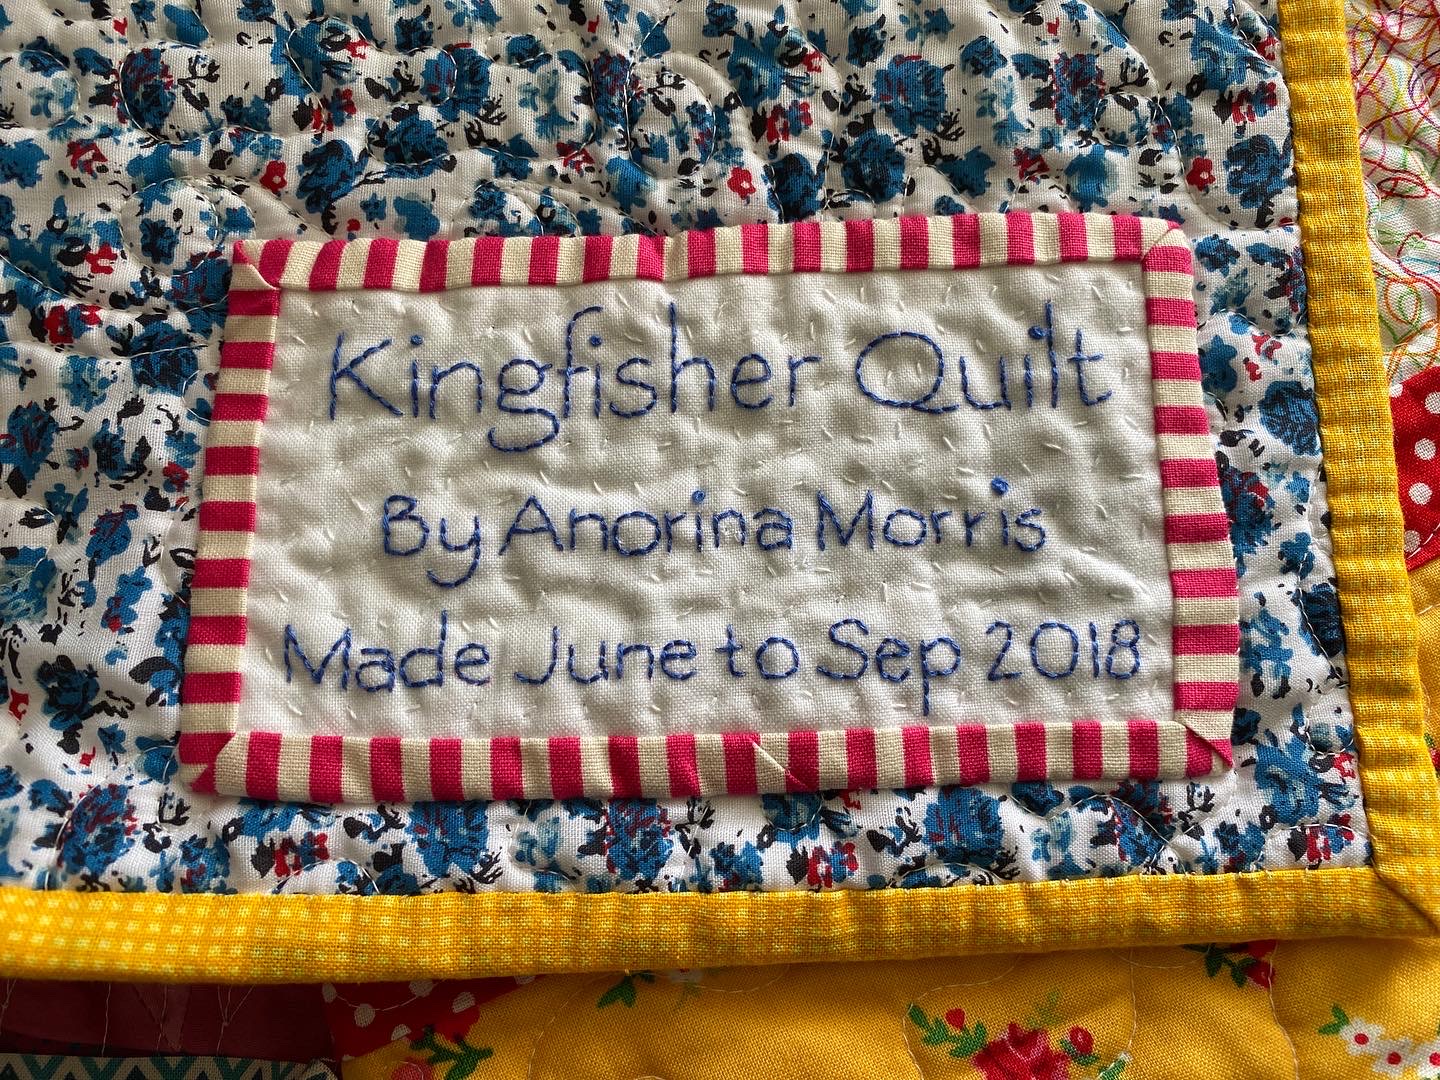  Quilting Labels